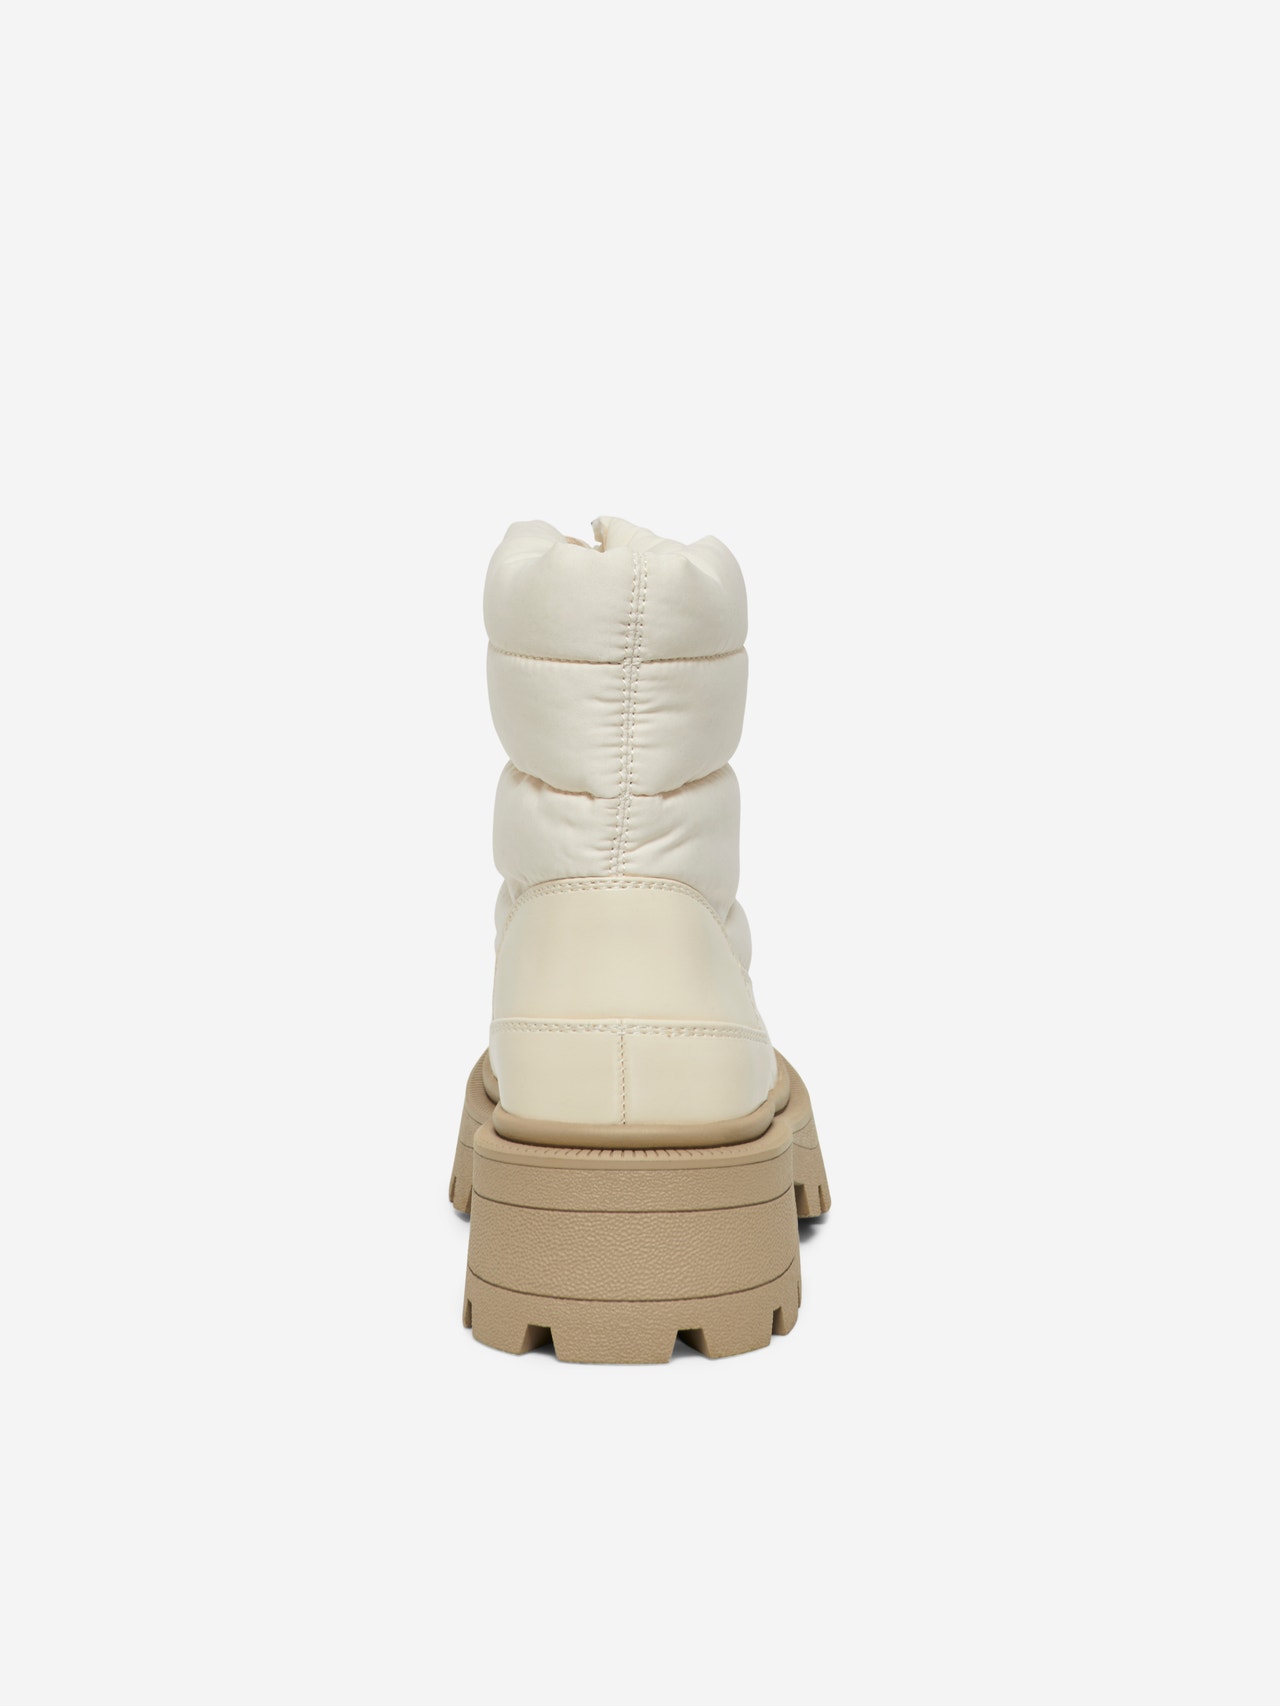 ONLY Round toe Boots -Creme - 15304727